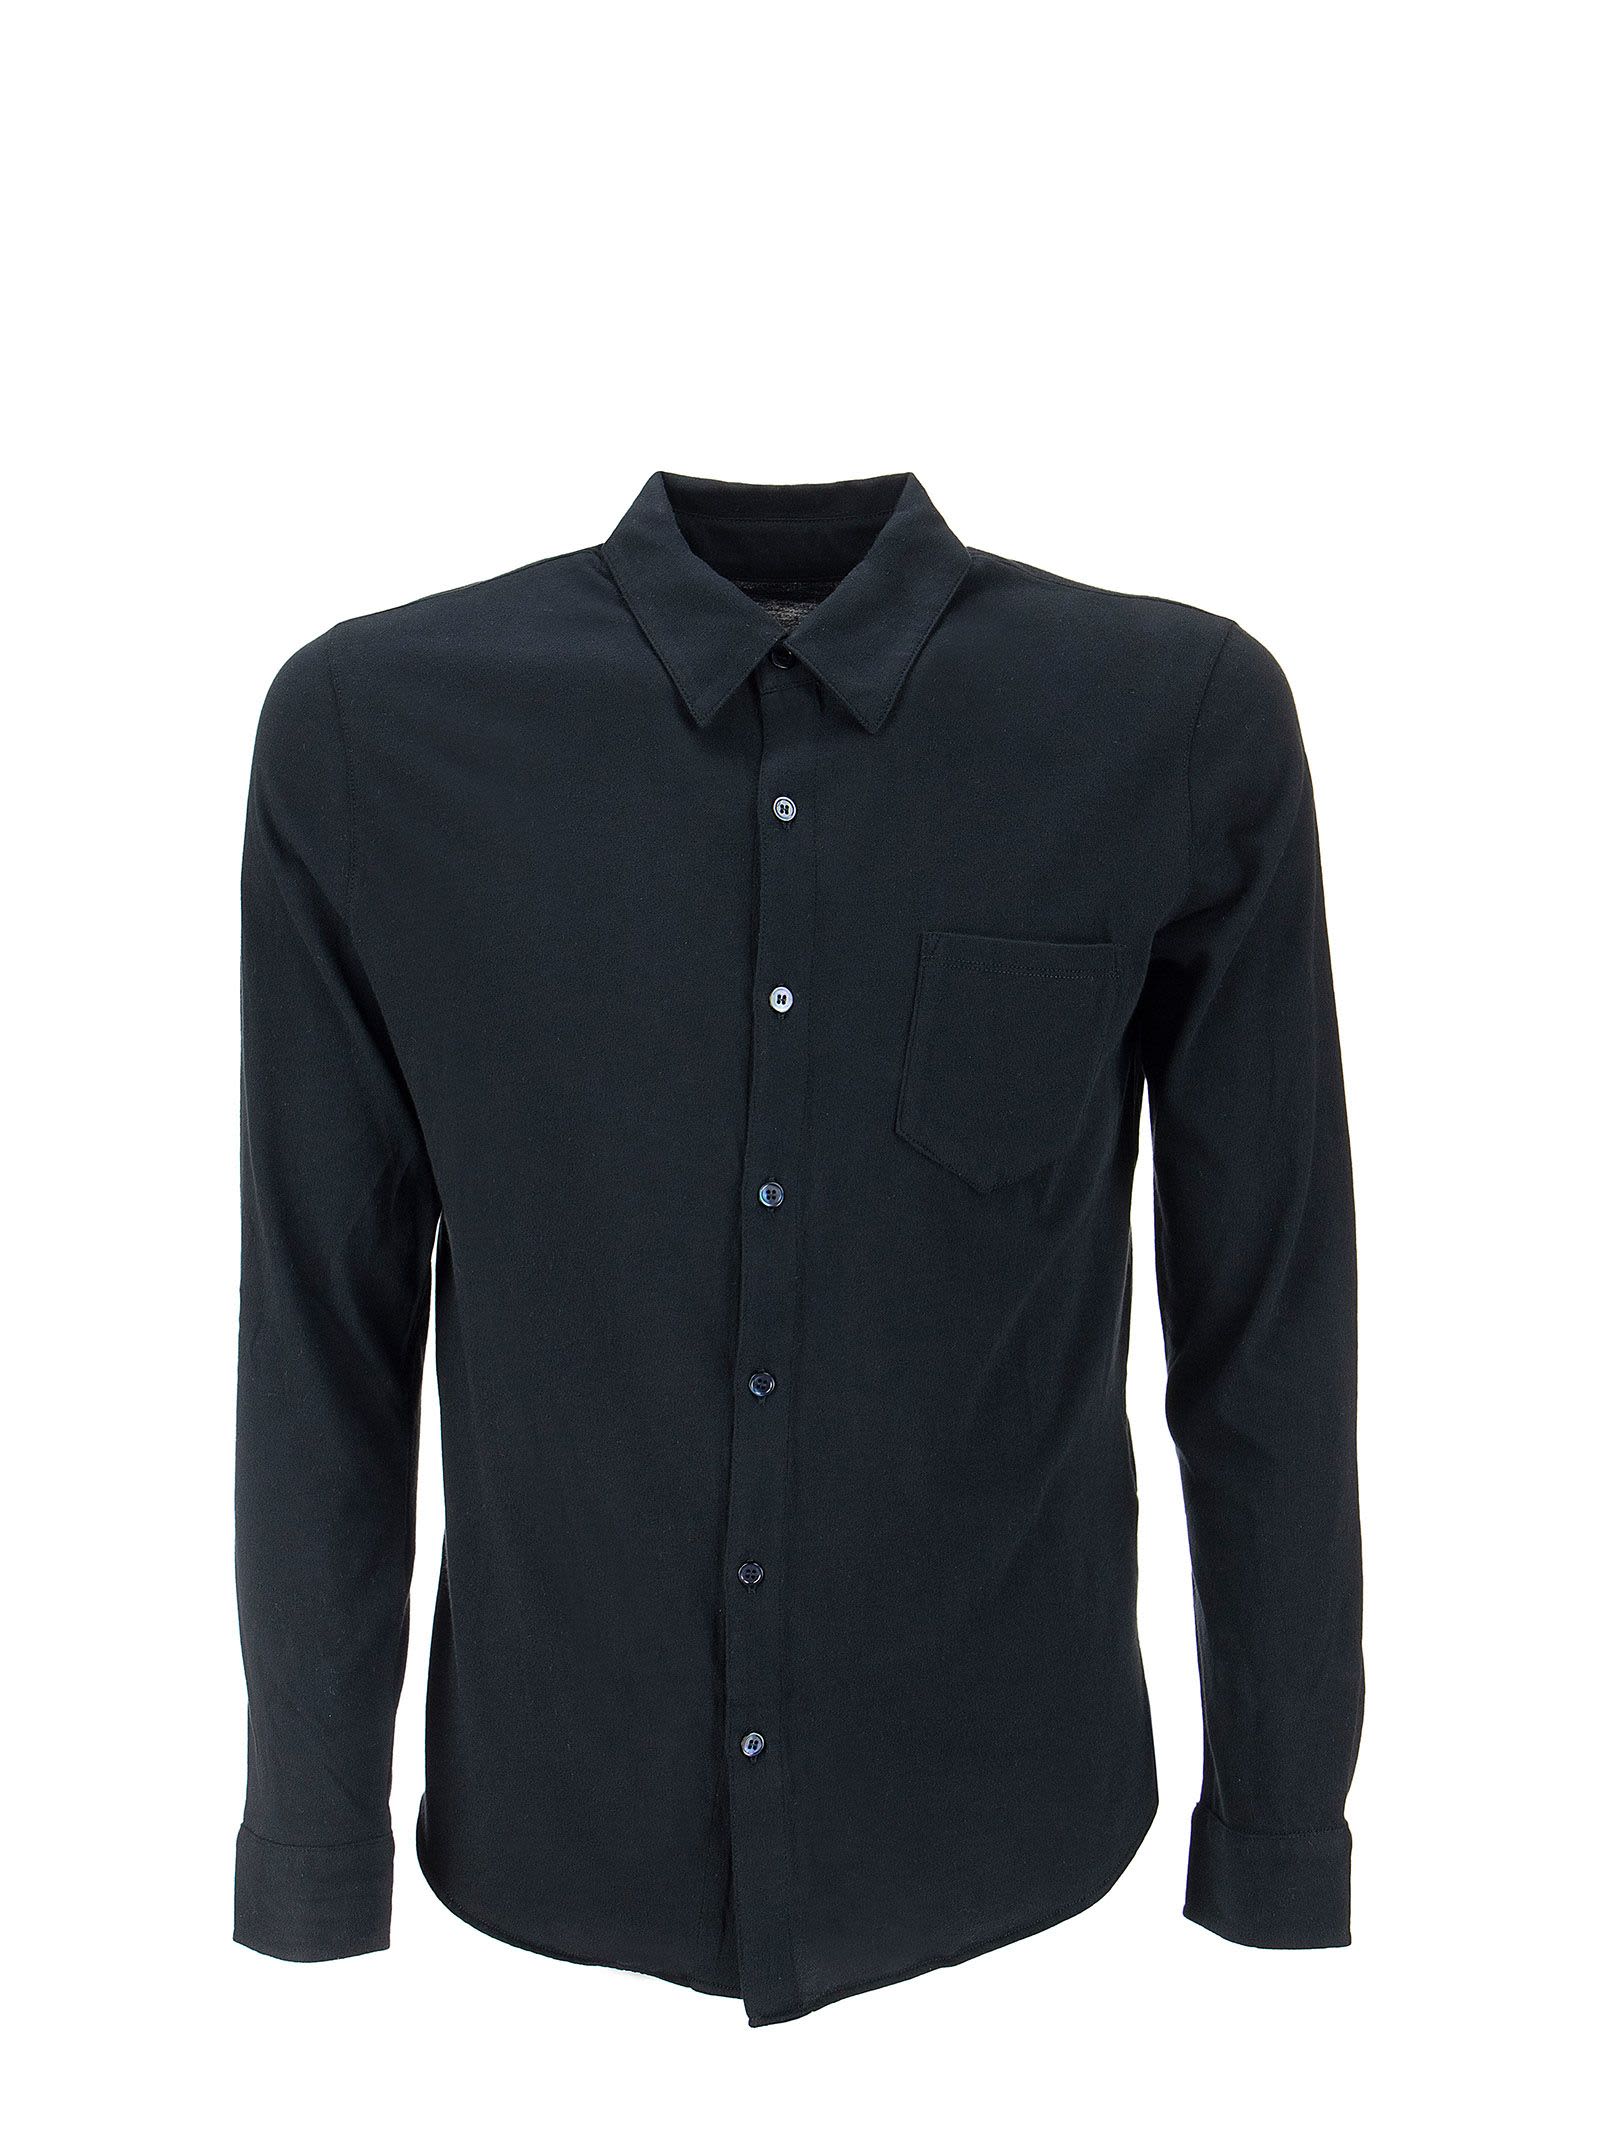 MAJESTIC DELUXE COTTON LONG SLEEVE SHIRT,M007 HCH009 003